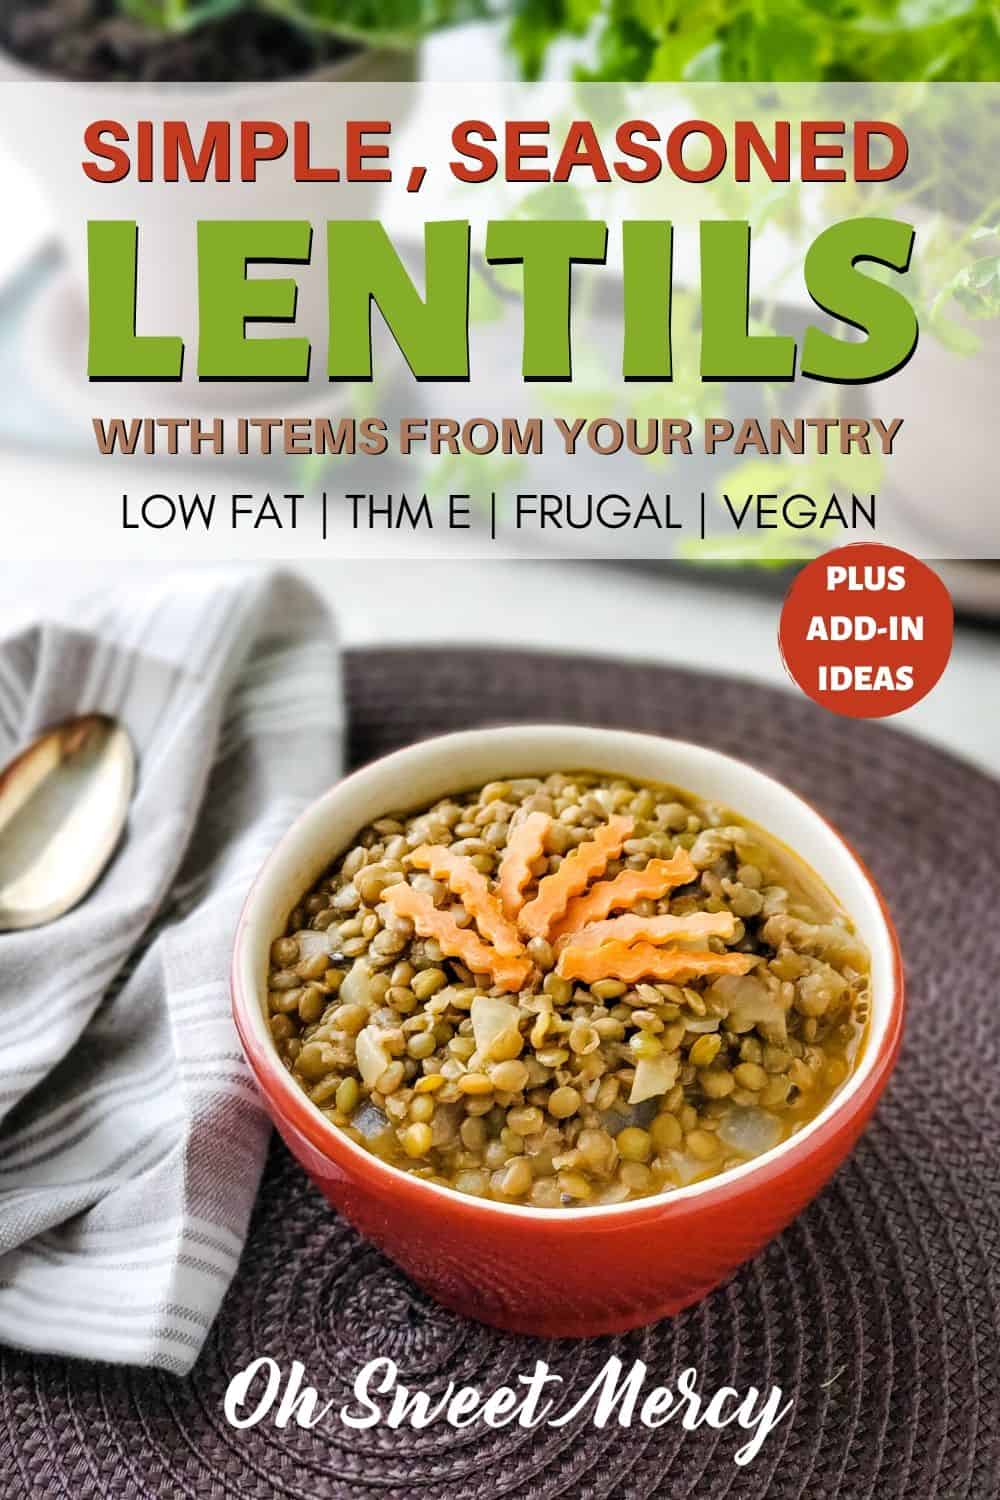 My Simple Seasoned Lentils are easily made with pantry items. Frugal, healthy, and a great THM E fuel source! Add veggies and cooked, lean meats or eat them as is. Perfect for vegans and vegetarians too. #lentils #pantrycooking #lowfat #thm #healthy #vegan #vegtarian